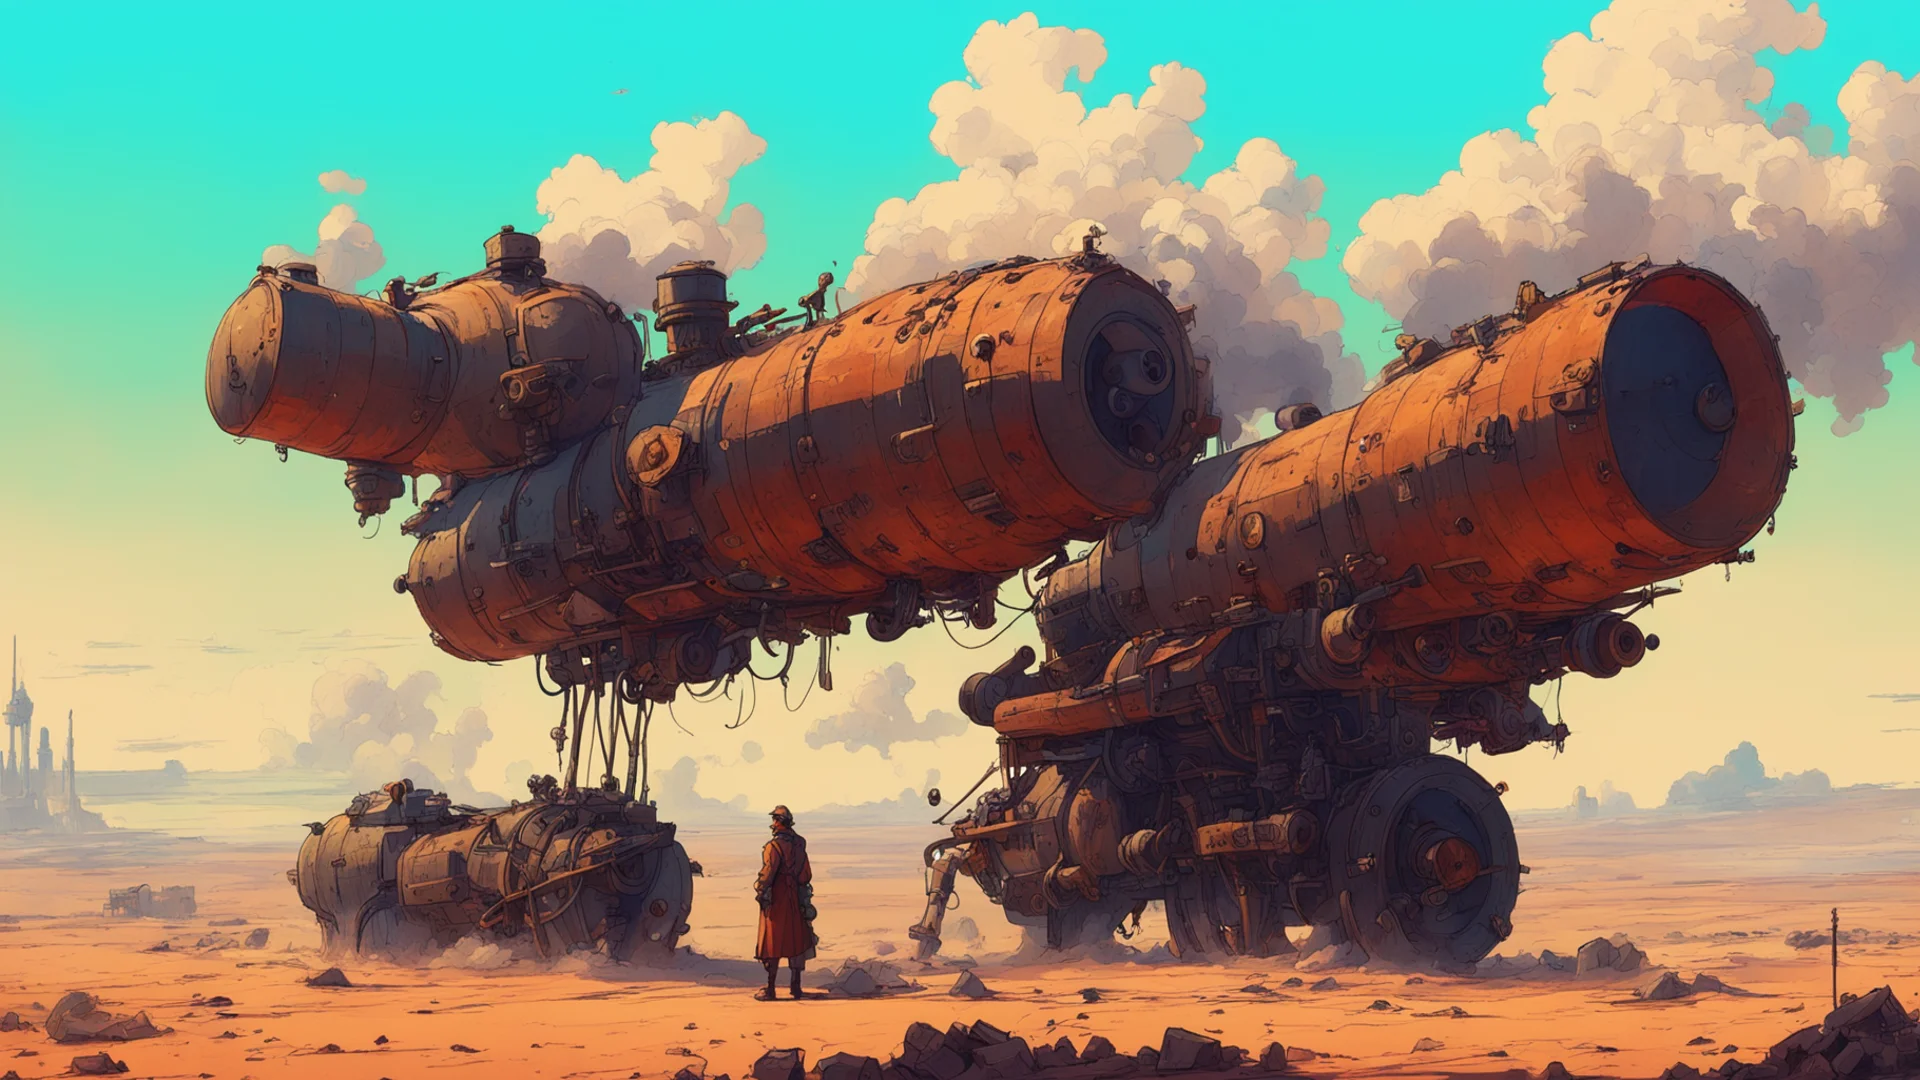 aia smoking cannon designed by george lucas on a battlefield moebius ghibli ian mcque wallpaper wide